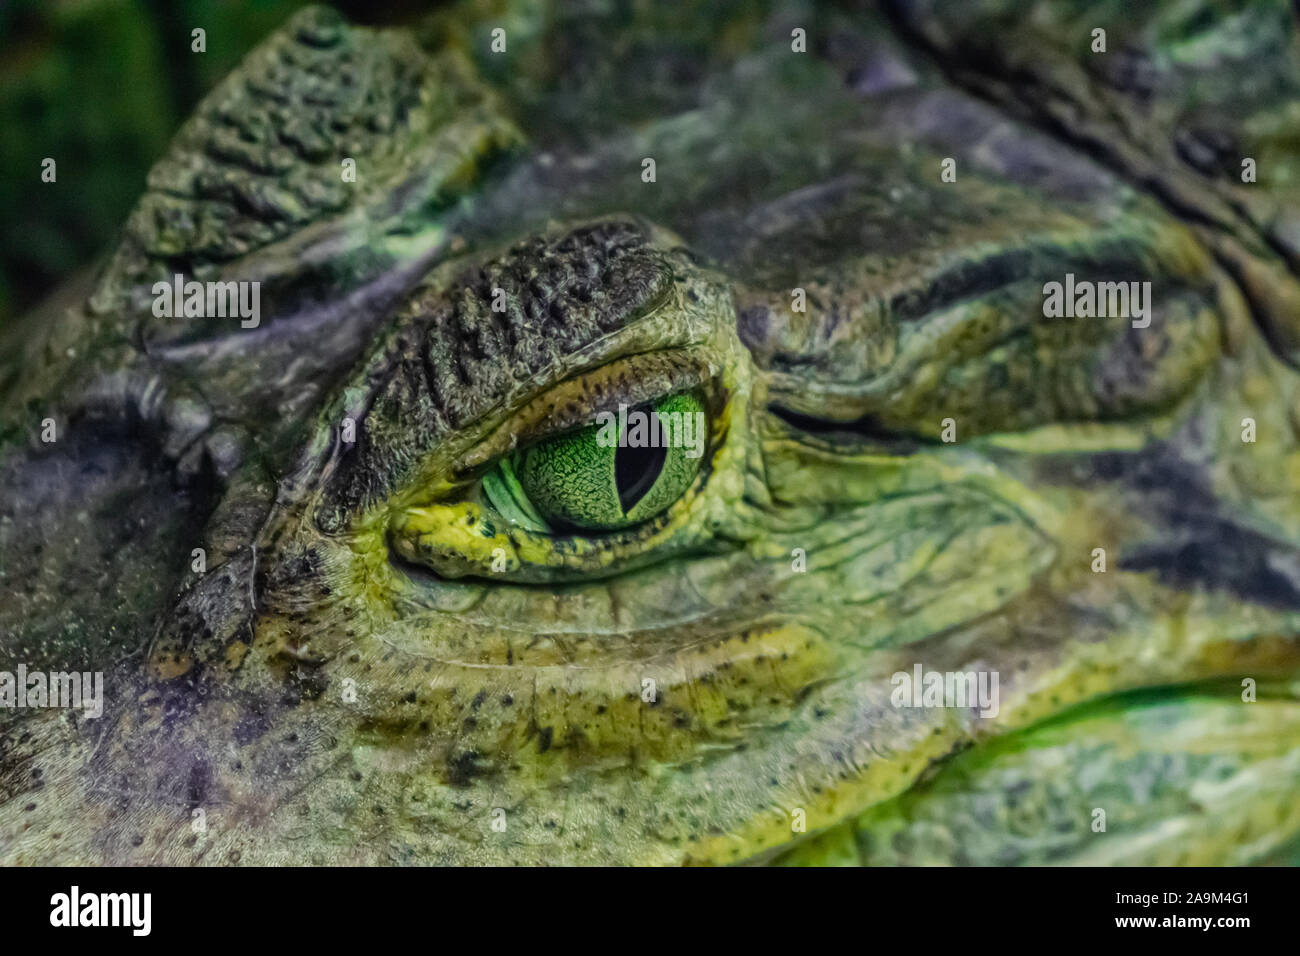 spectacled caiman (Caiman crocodilus), eye close view Stock Photo